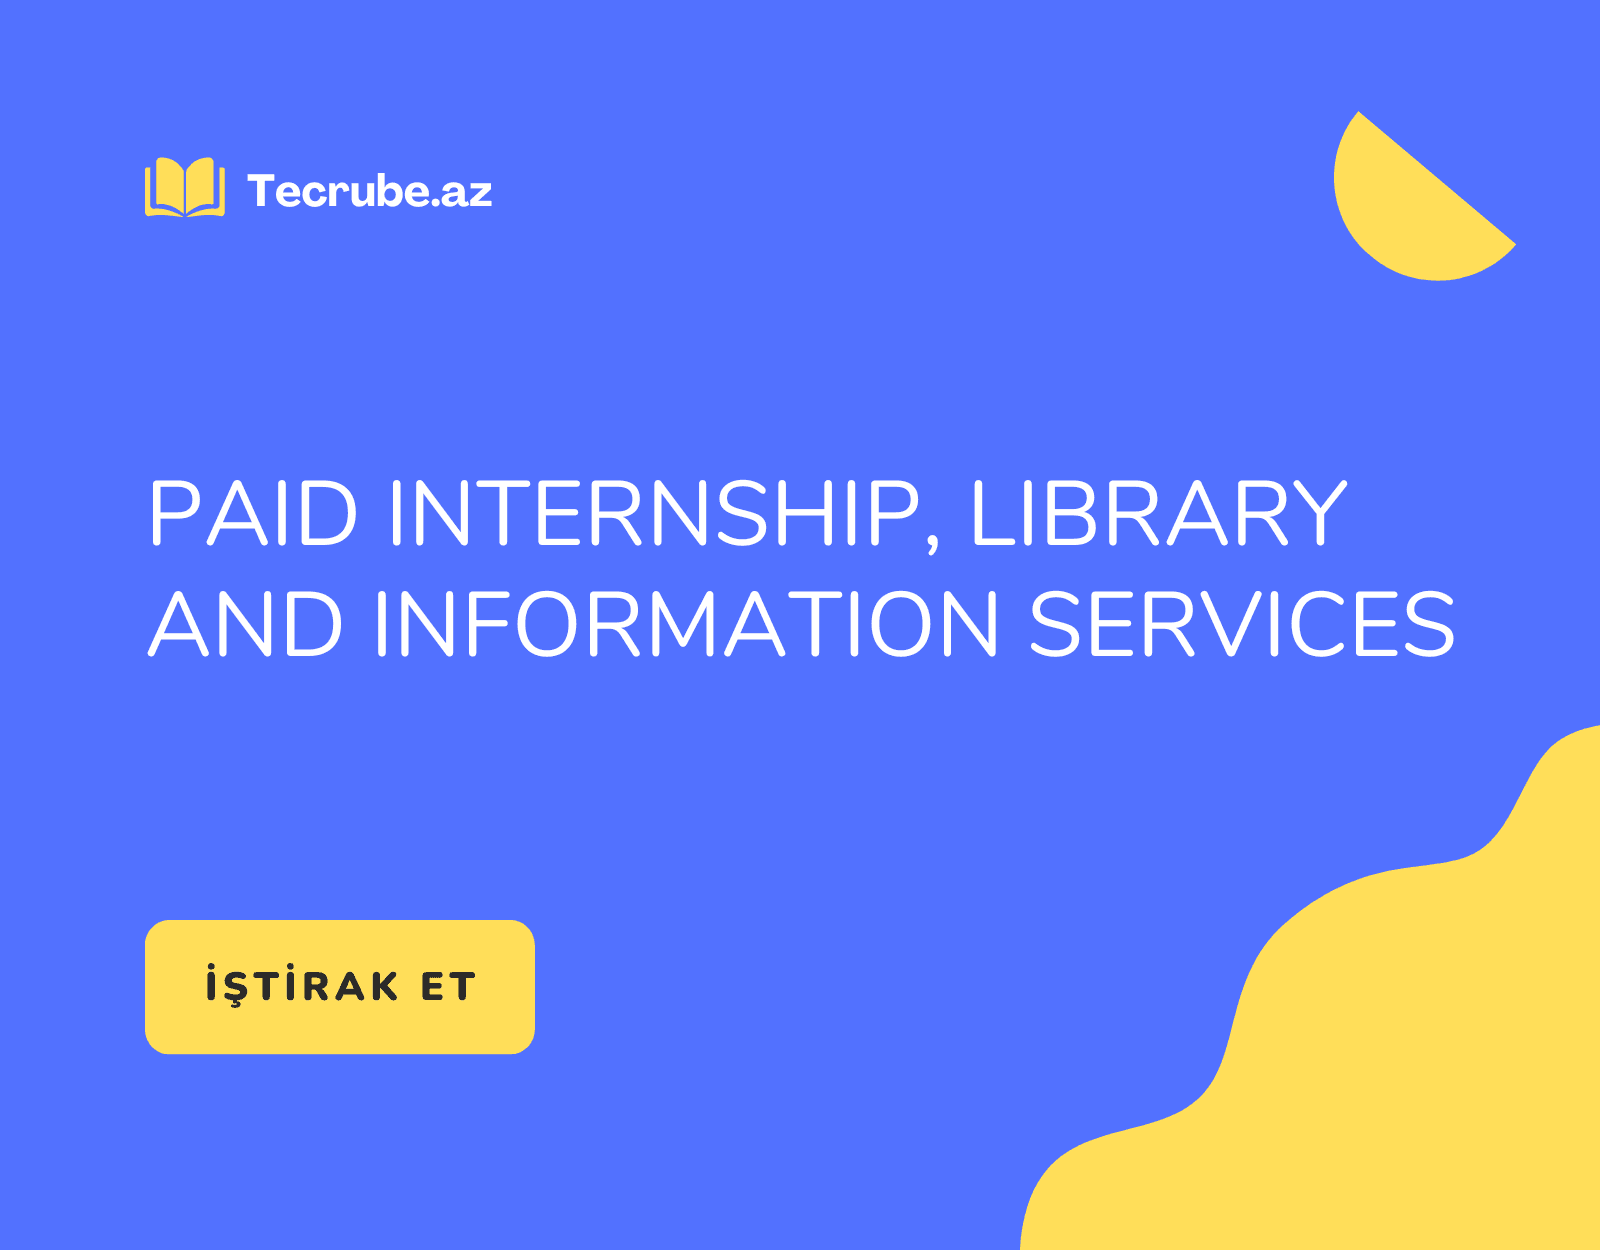 PAID INTERNSHIP, LIBRARY AND INFORMATION SERVICES